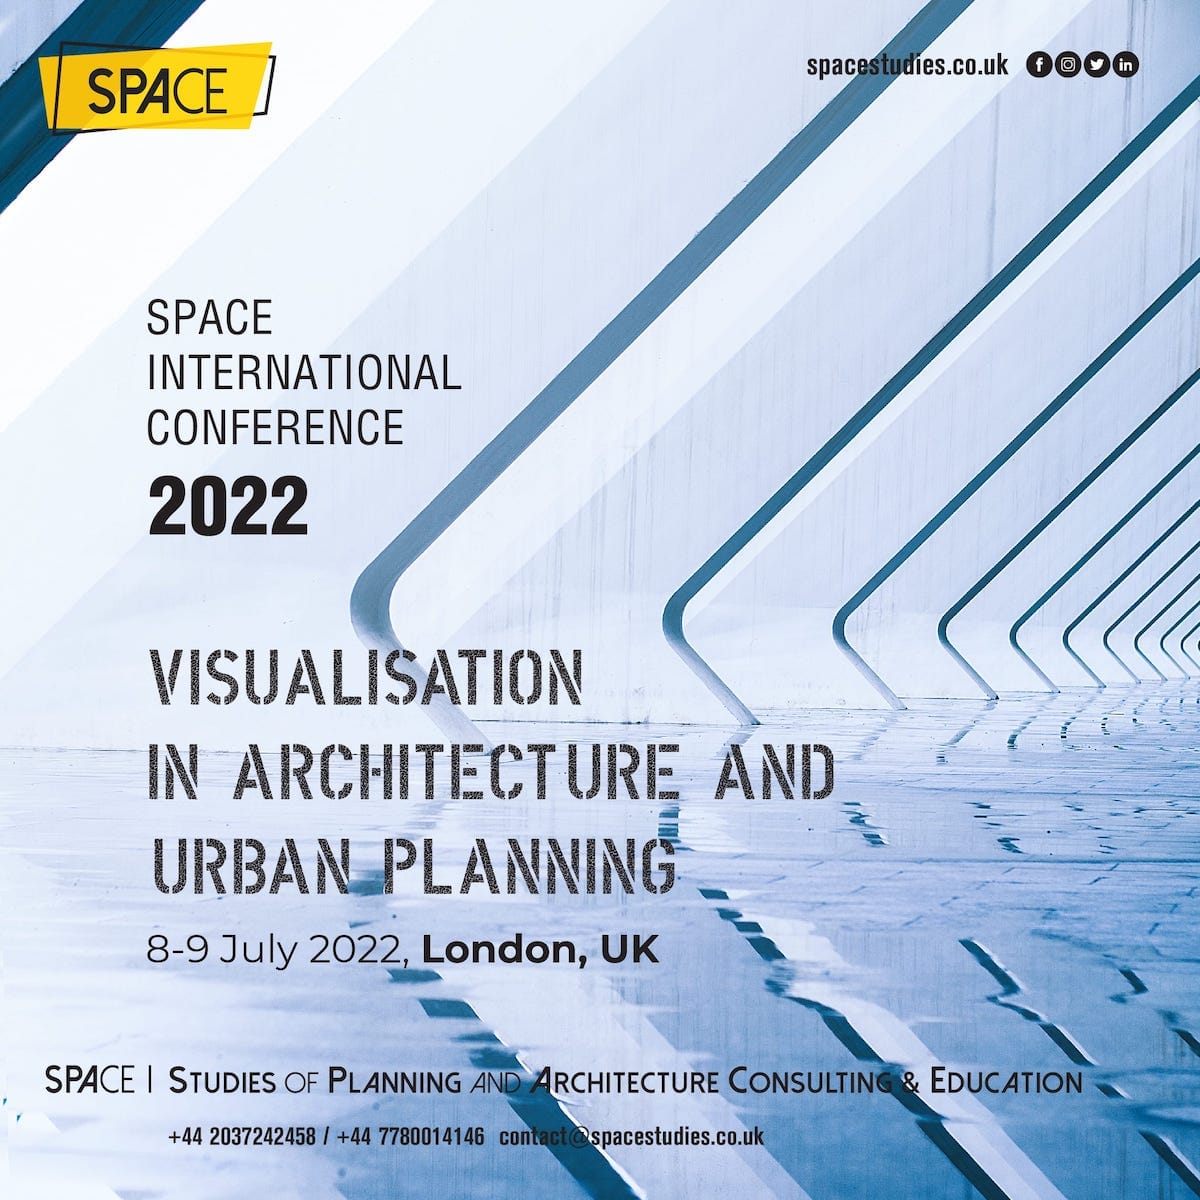 Conference Visualisation in Architecture & Urban Planning Space Studies